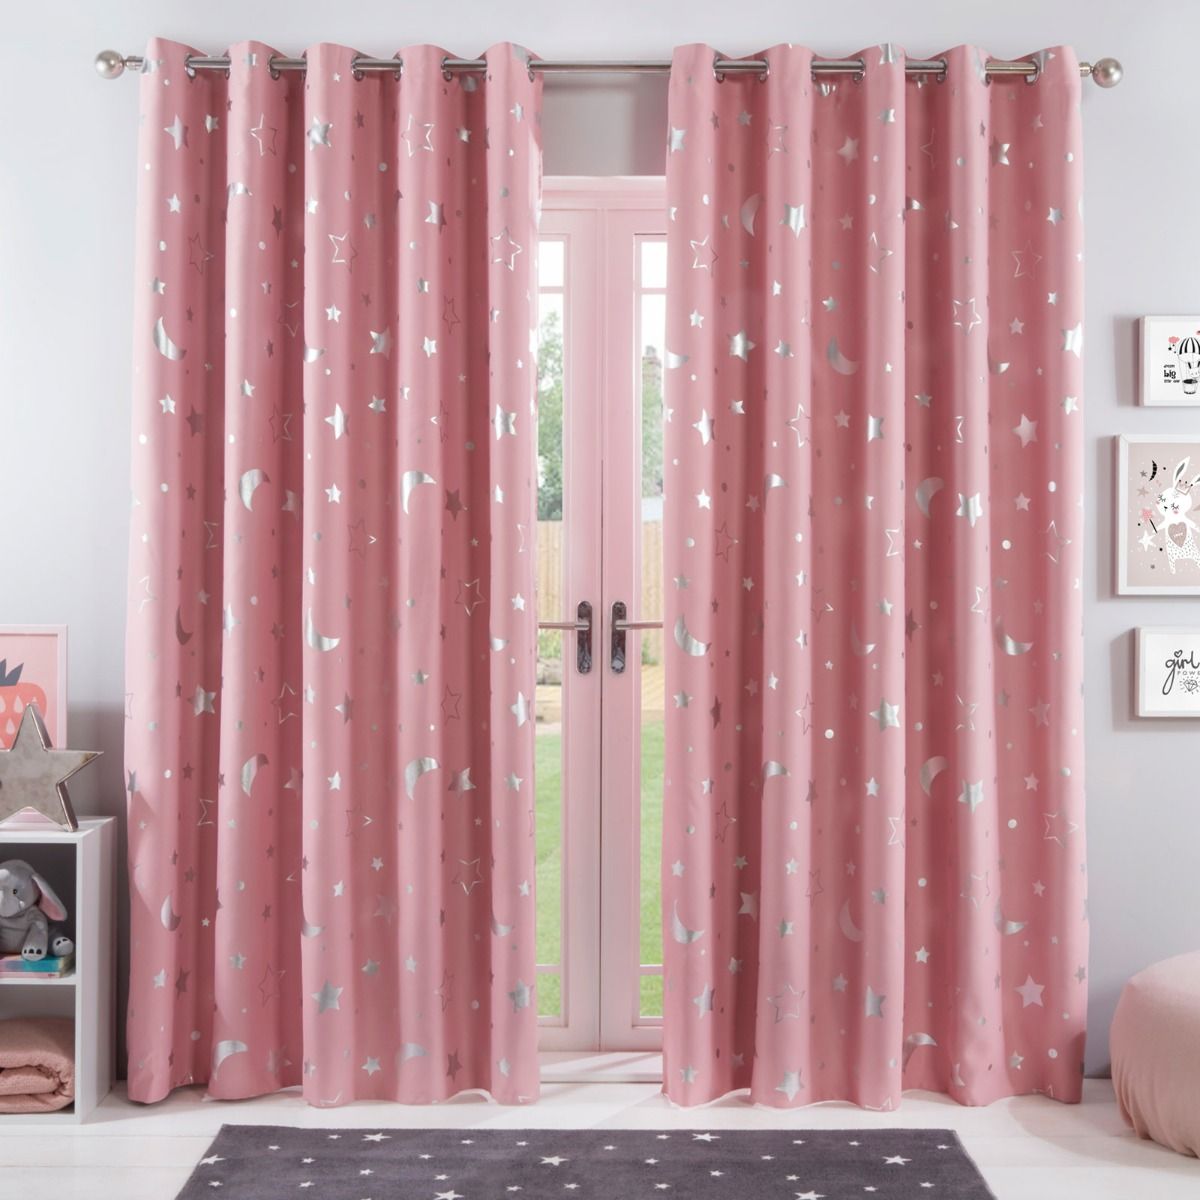 132 * 241cm, Black-2pcs Dream Art Anti Mite Super Soft Thermal Insulated Curtain/Drape for Nursery,Children Kids Bedroom Eyelet Blackout Curtains for Living room Energy Saving Noise Reducing 